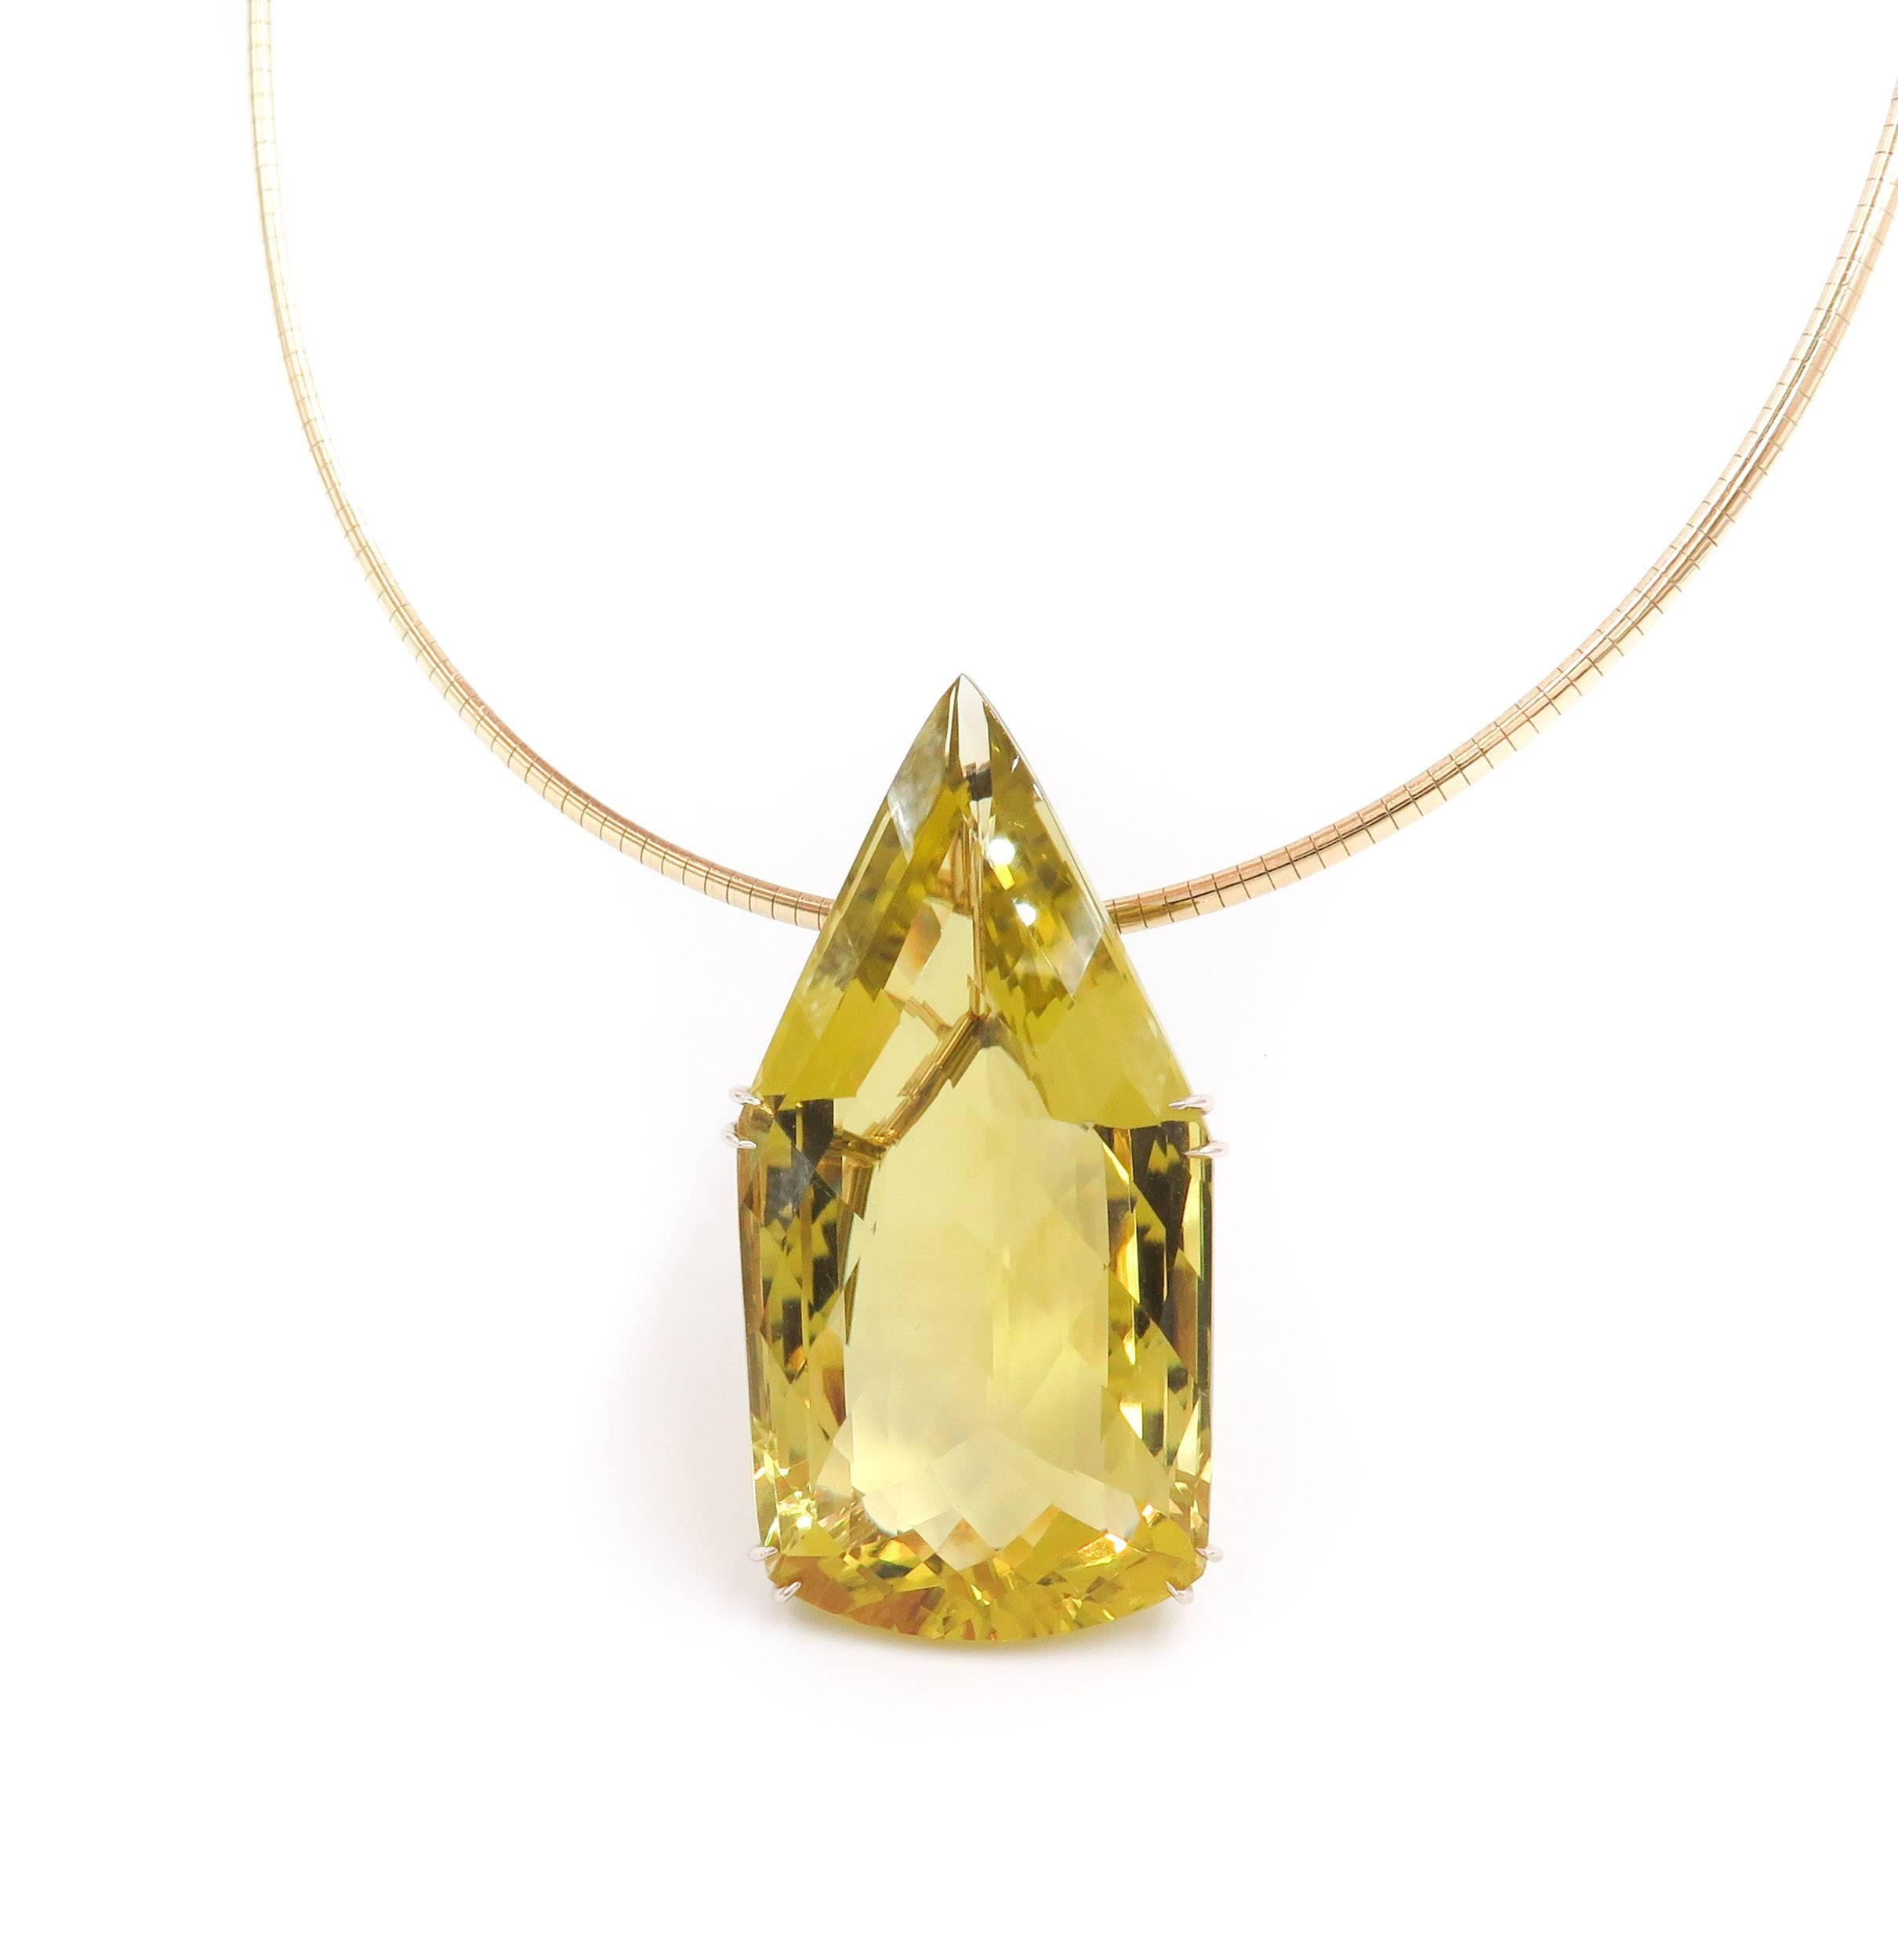 One of a Kind Pendant handcrafted in 14k yellow gold with a 200 carat faceted lemon quartz, suspended by an 18 inch long Omega necklace to showcase the beauty and brilliance of the Lemon Quartz.
The lemon quartz is 2.5 inches in length by 1.1 inches